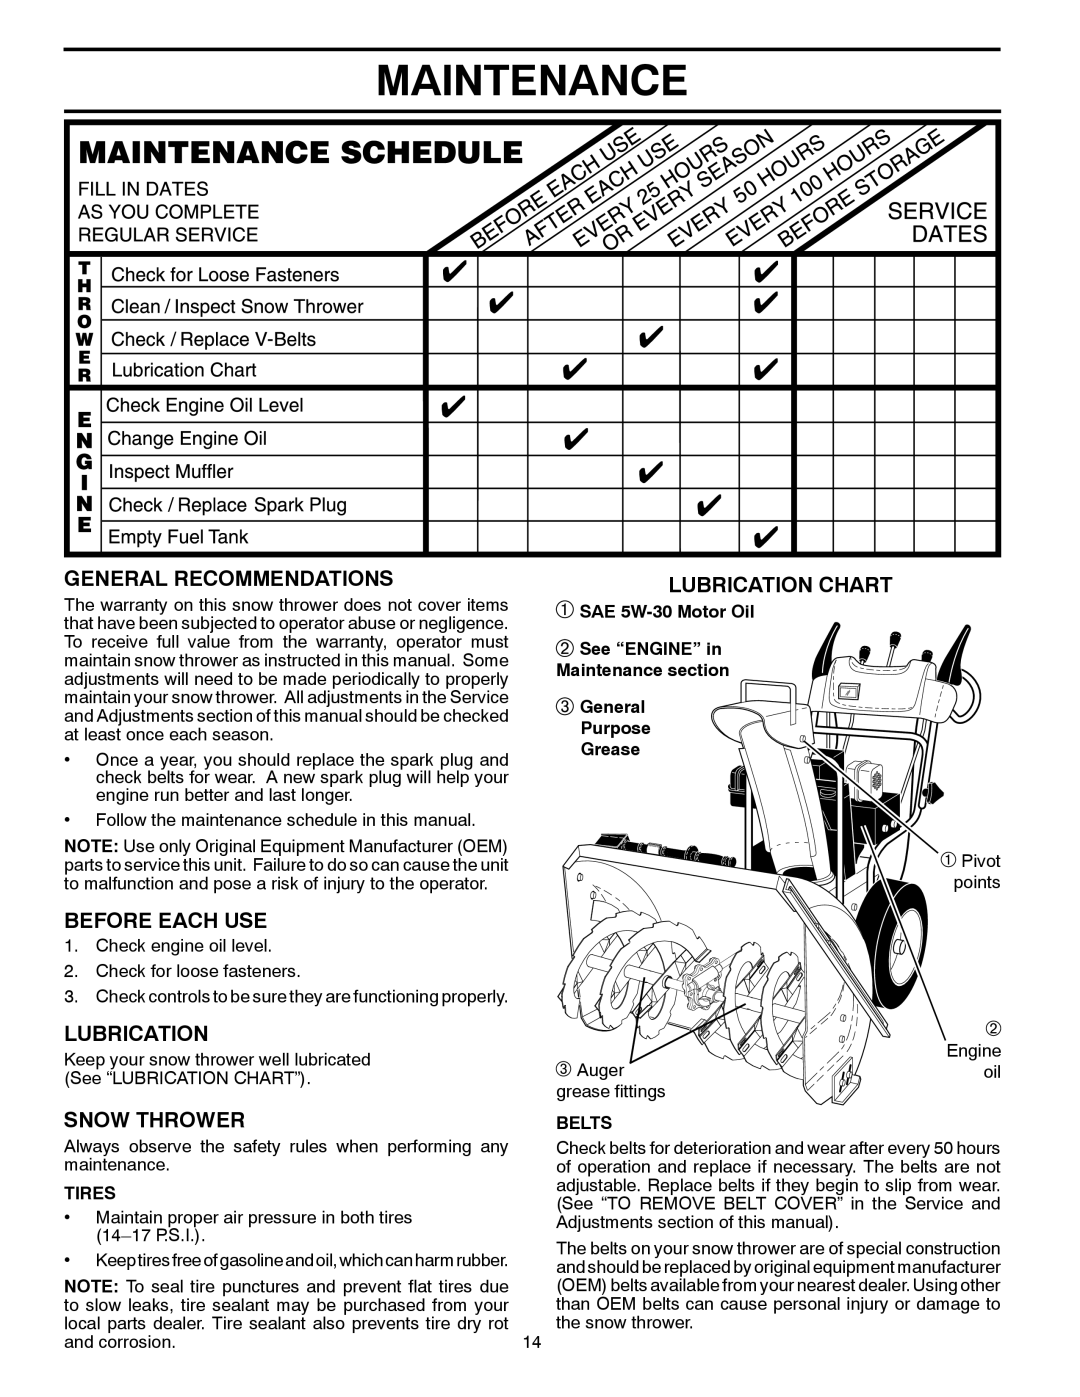 Poulan 435555 Maintenance, General Recommendations, Before Each Use, Lubrication Chart, Snow Thrower, Purpose Grease 